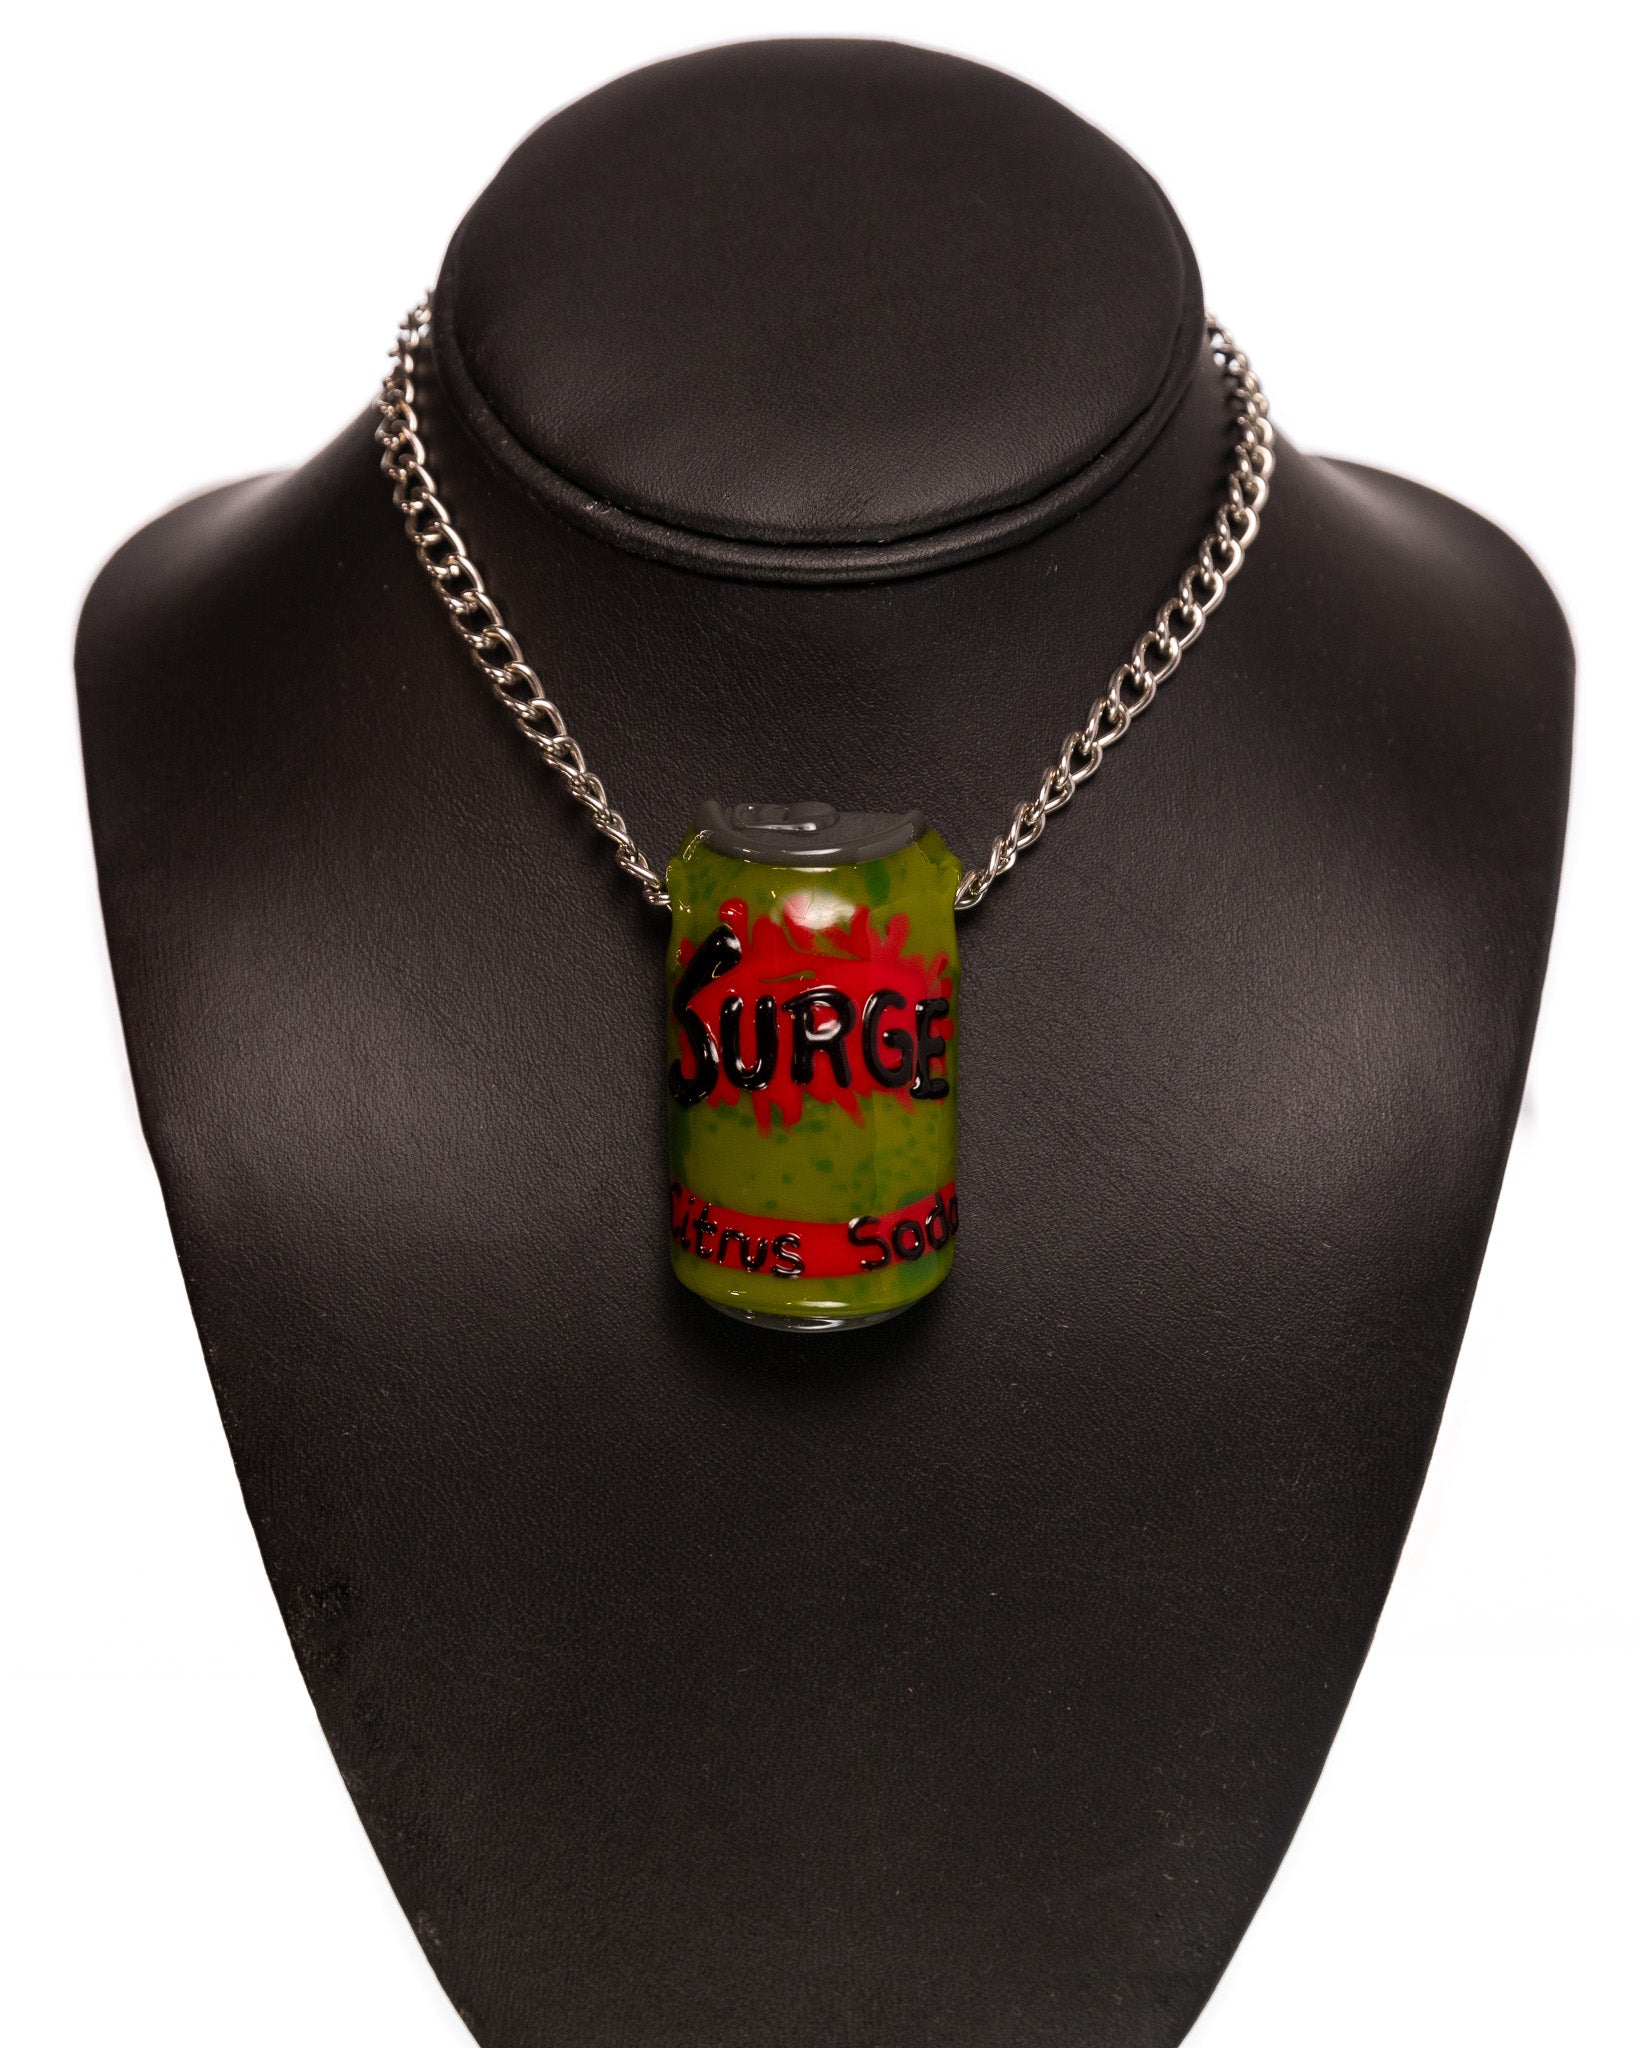 Heretic Glass - Surge Can Pendant